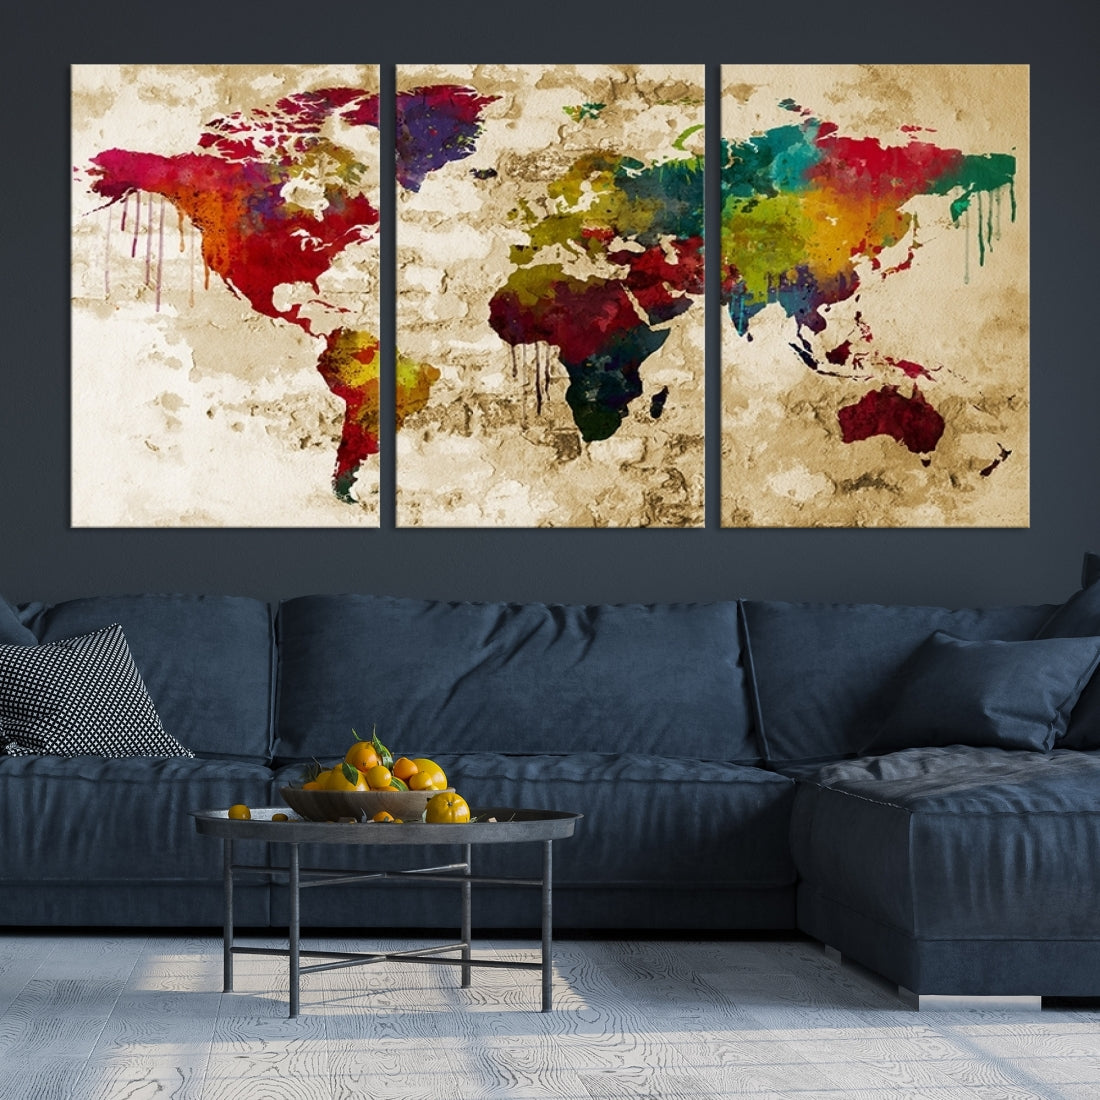 Large Wall Art World Map Canvas Print - Rainbow Colored Vintage Style World Map - Best Selling World Map